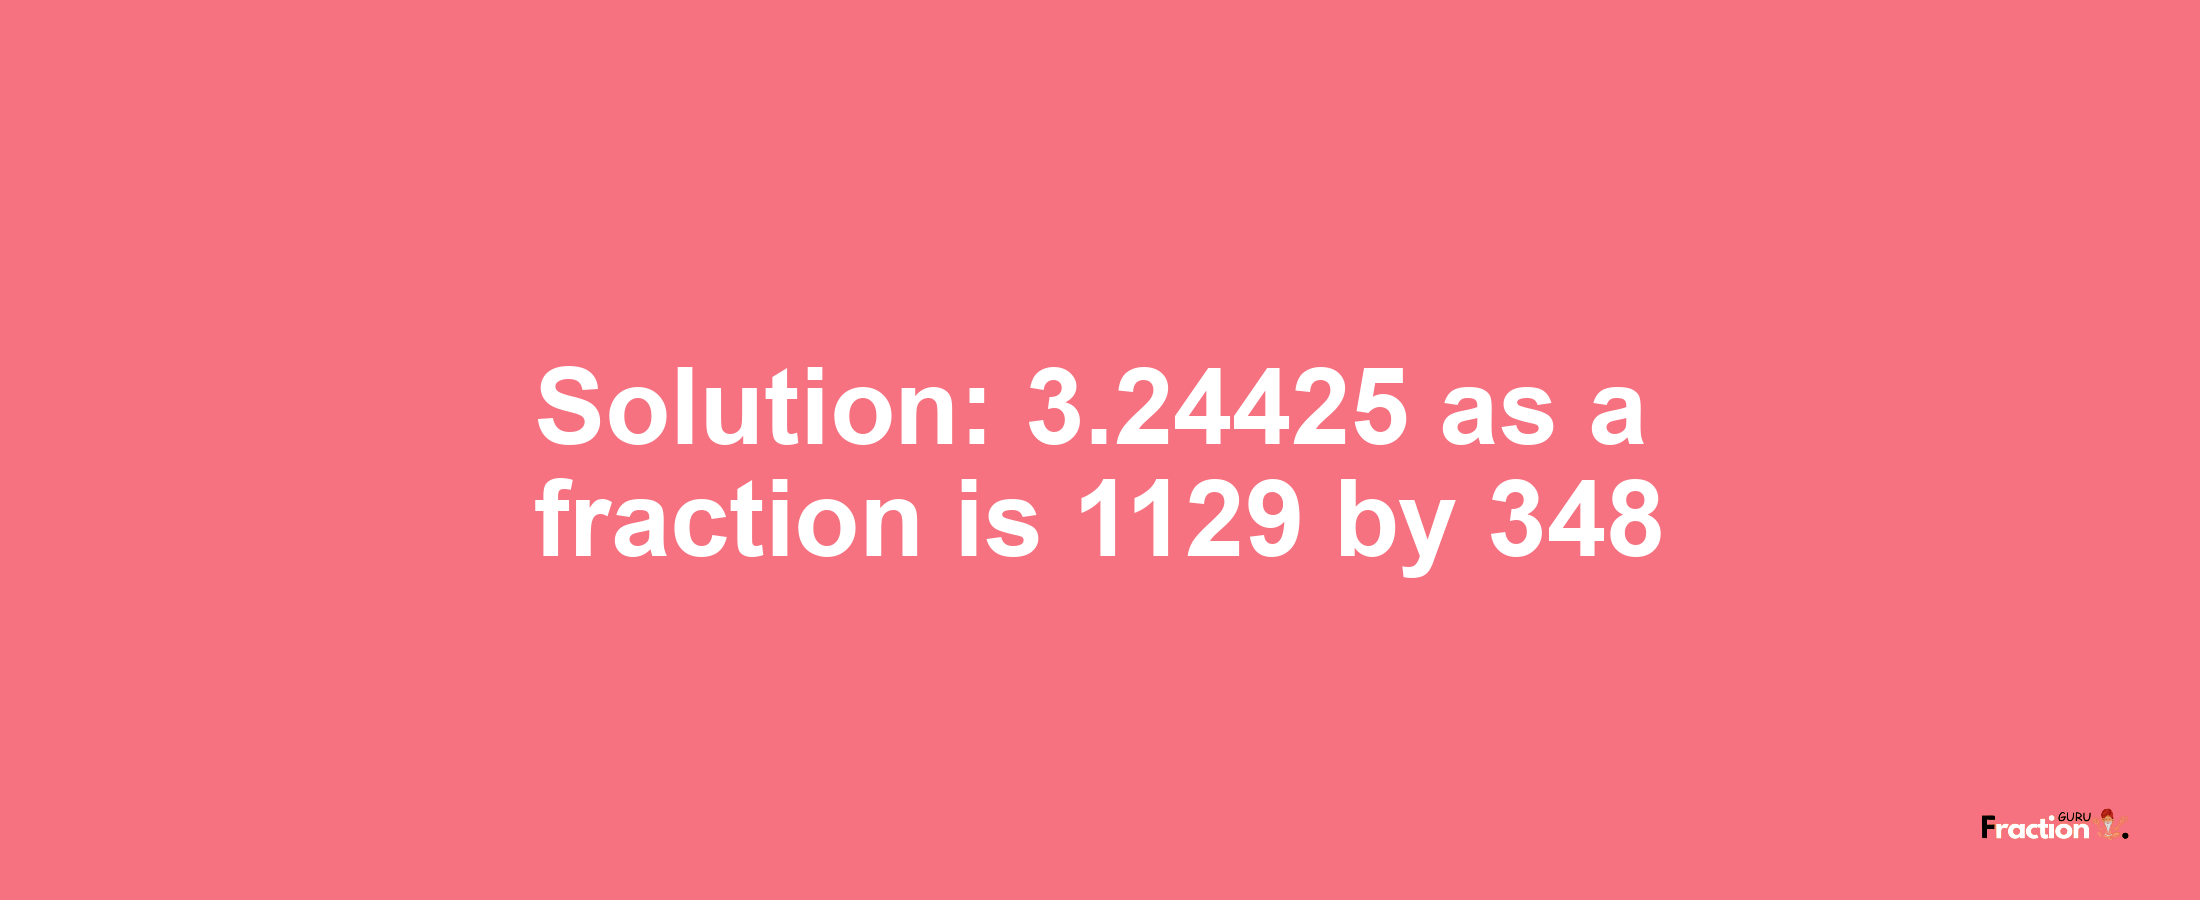 Solution:3.24425 as a fraction is 1129/348